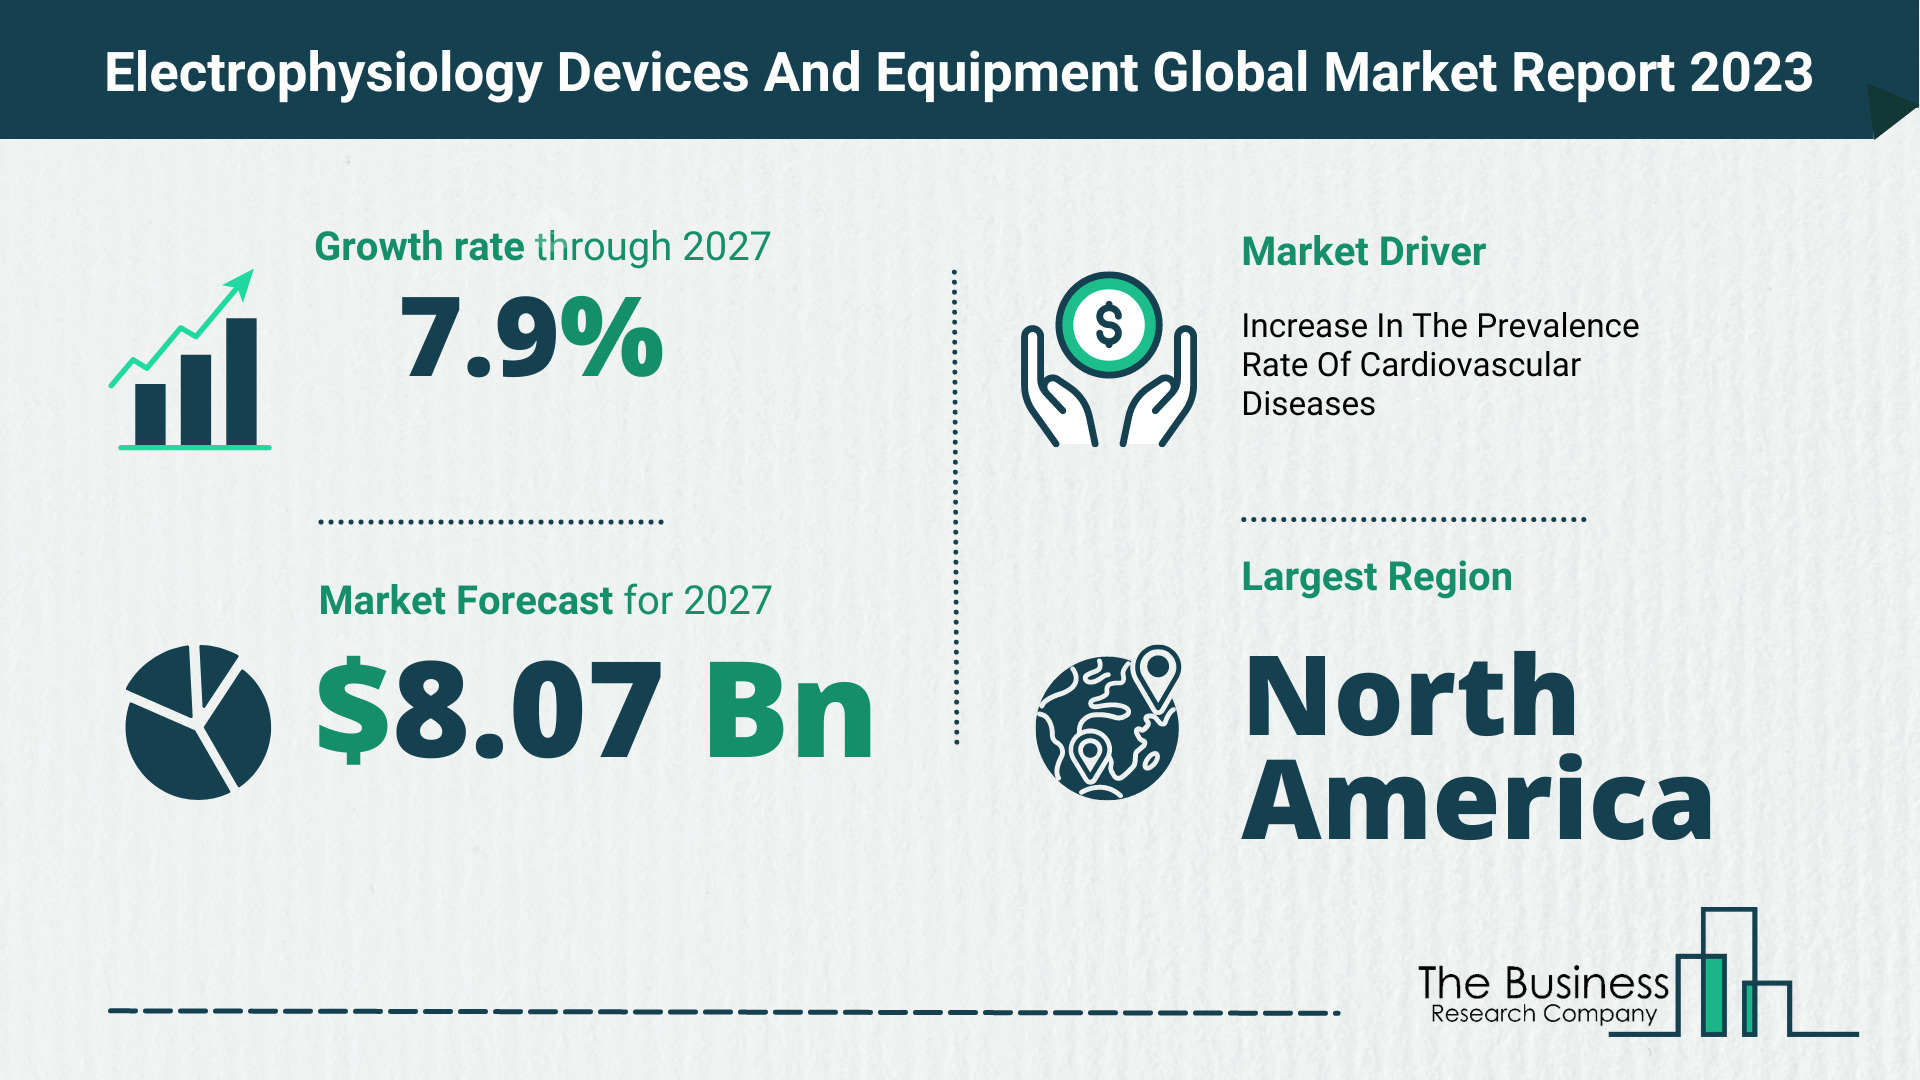 Global Electrophysiology Devices And Equipment Market